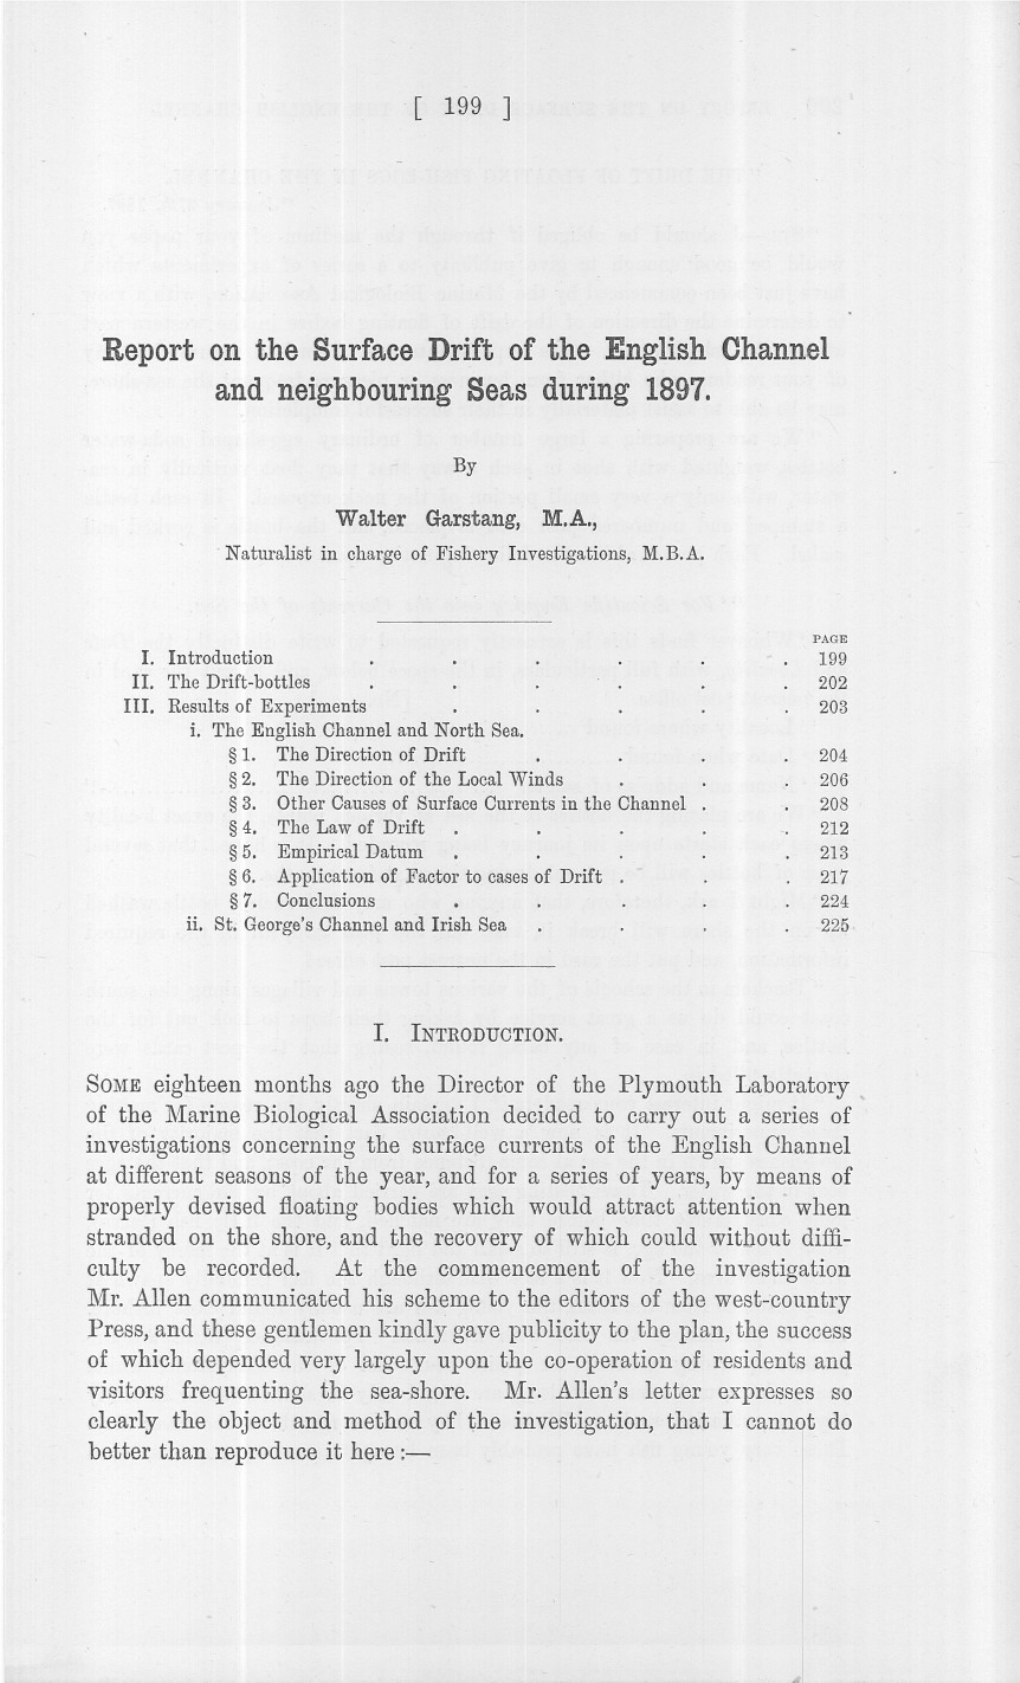 Report on the Surface Drift of the English Channel and Neighbouring Seas During 1897